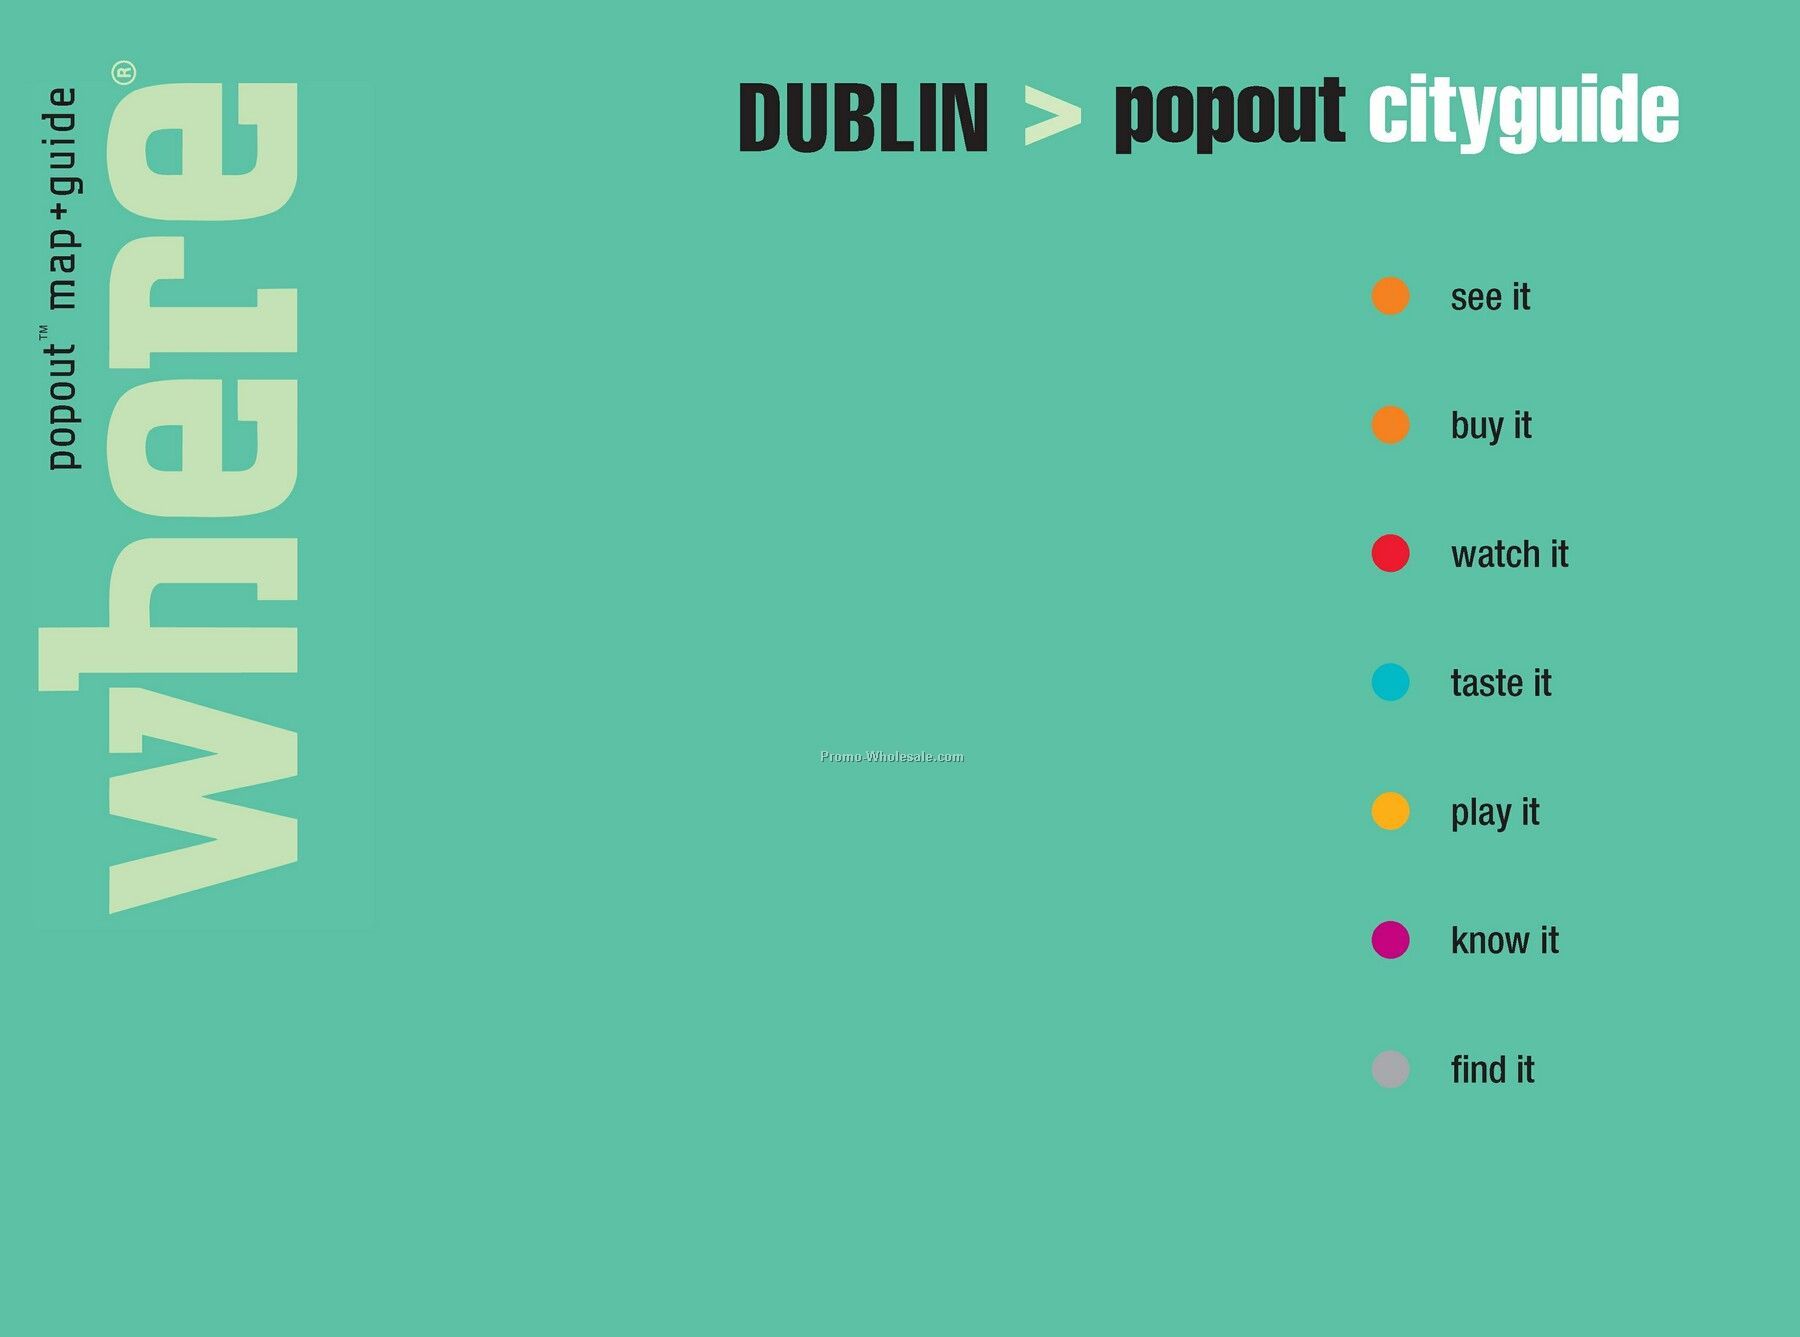 Travel Guides - International City Guide Of Dublin - Featuring Popout Maps